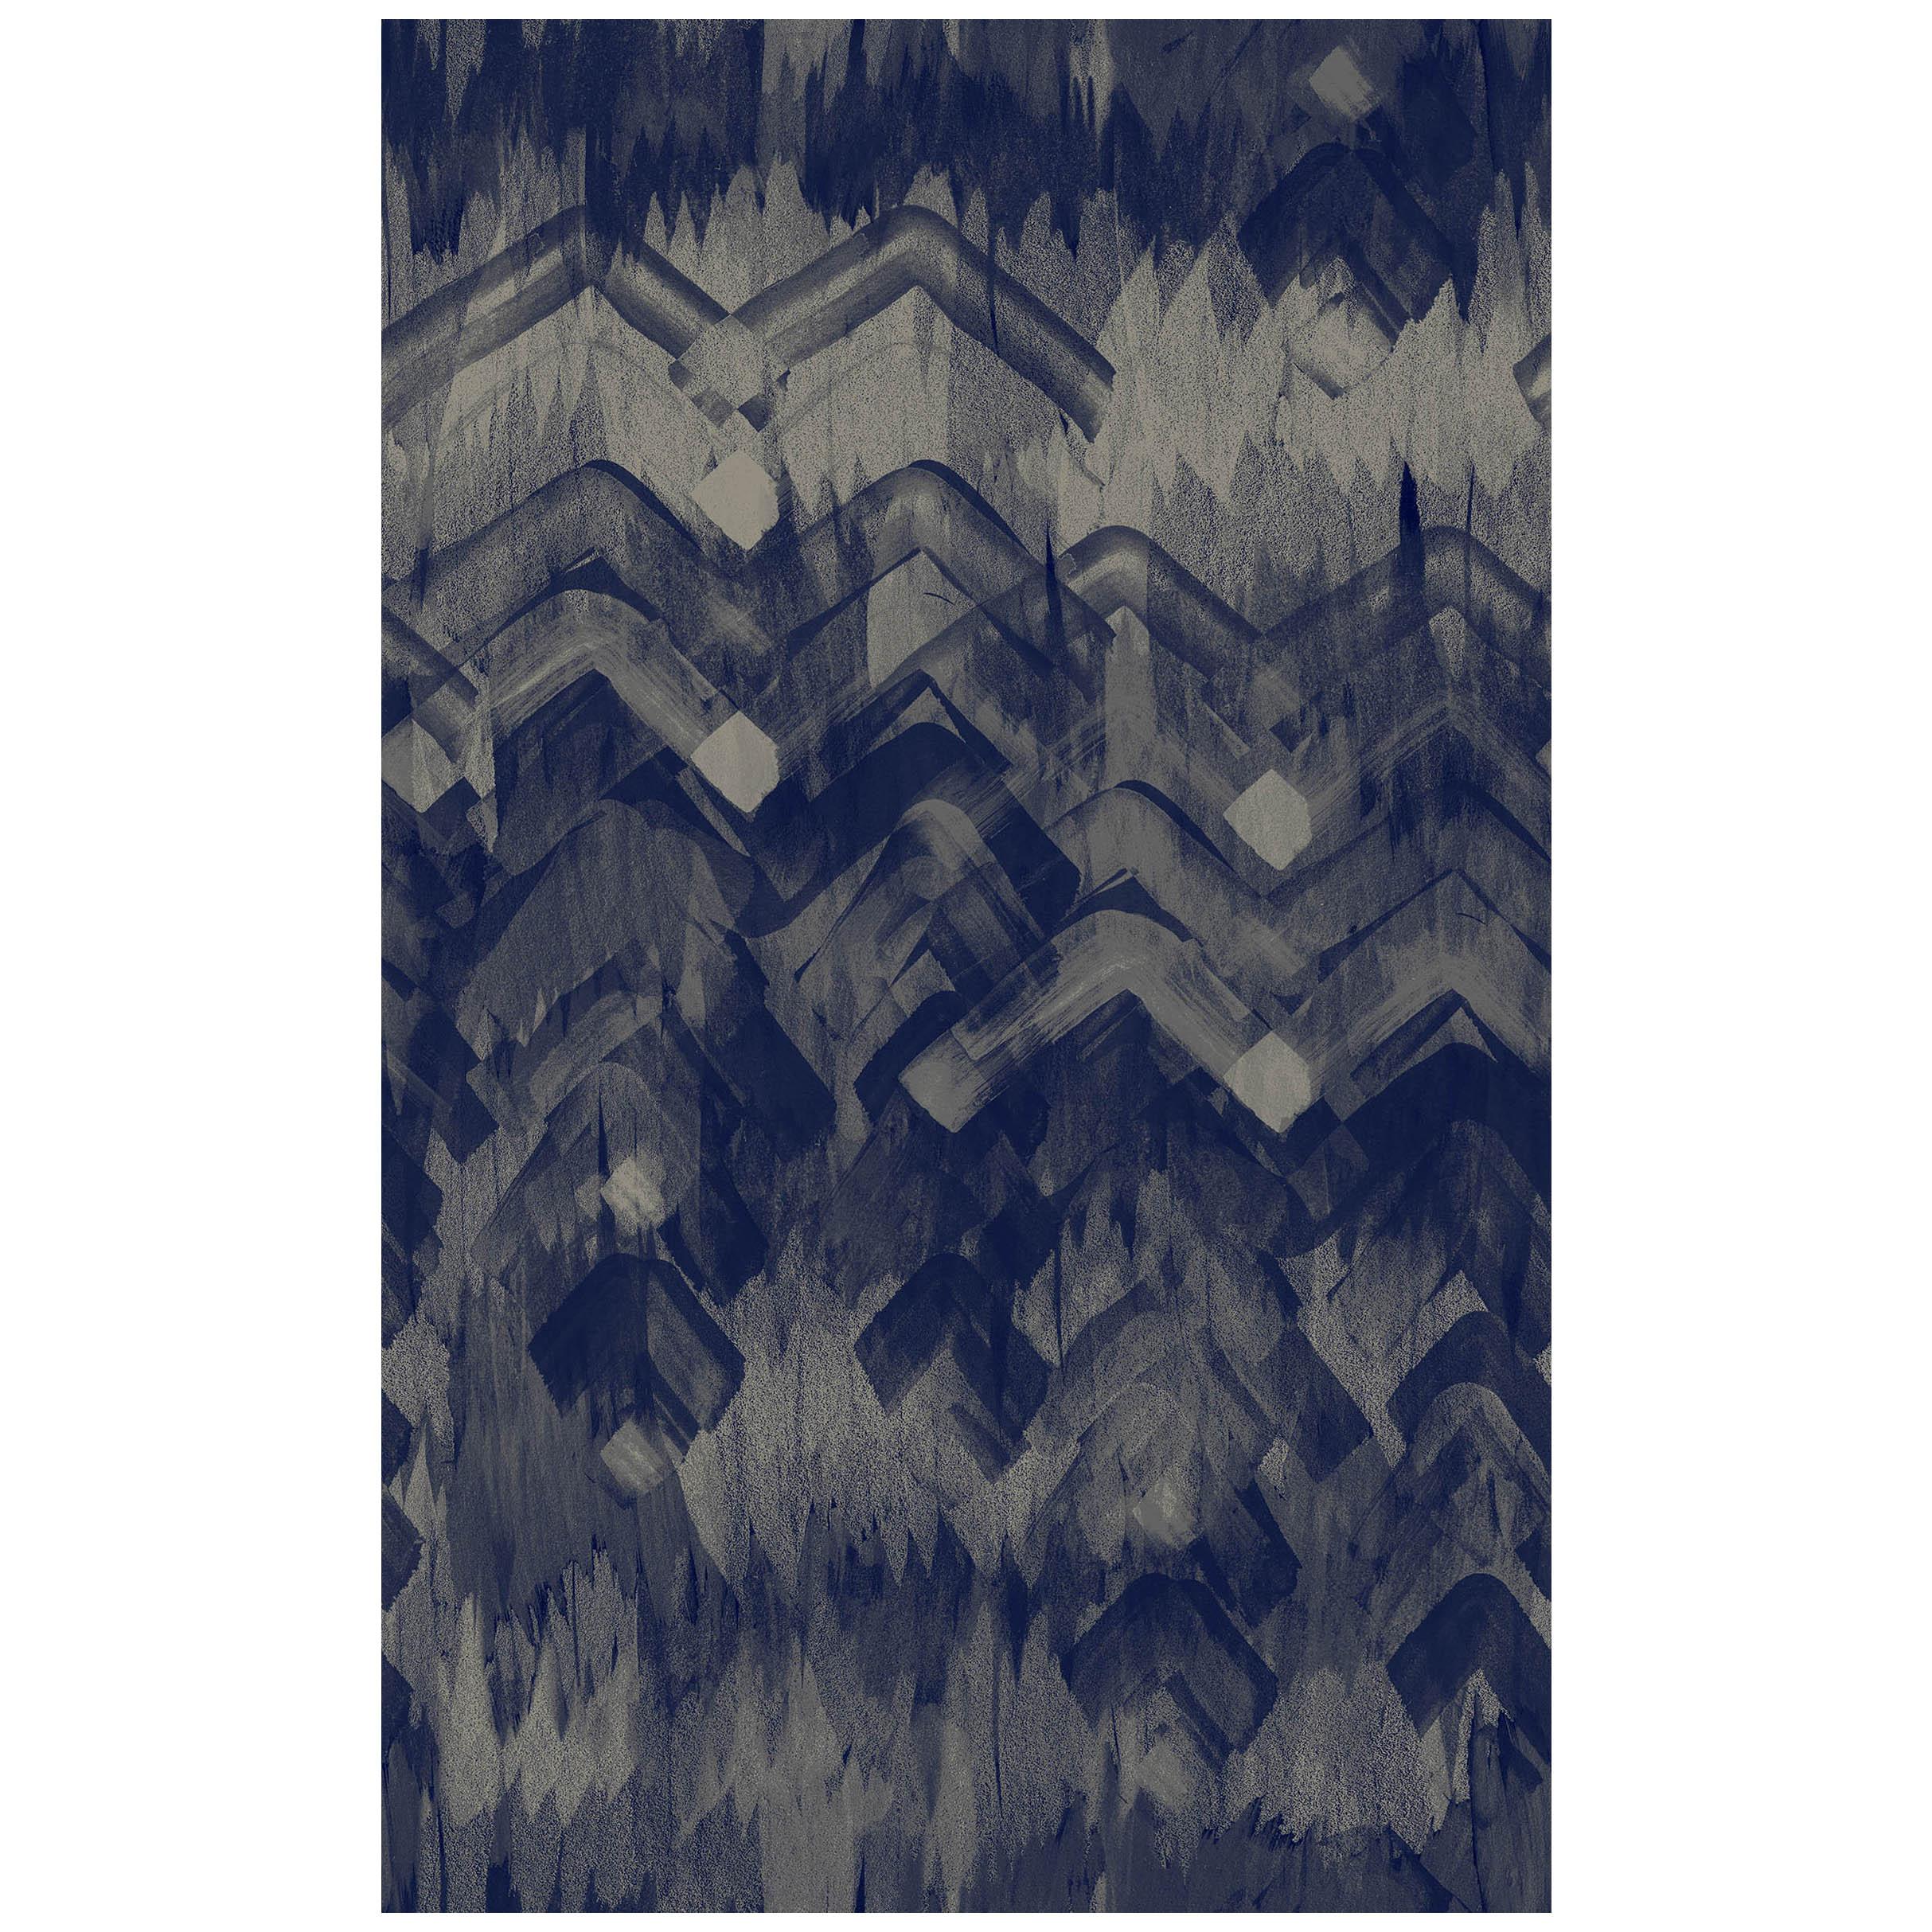 Brushed Herringbone Wallpaper in Blue by 17 Patterns For Sale